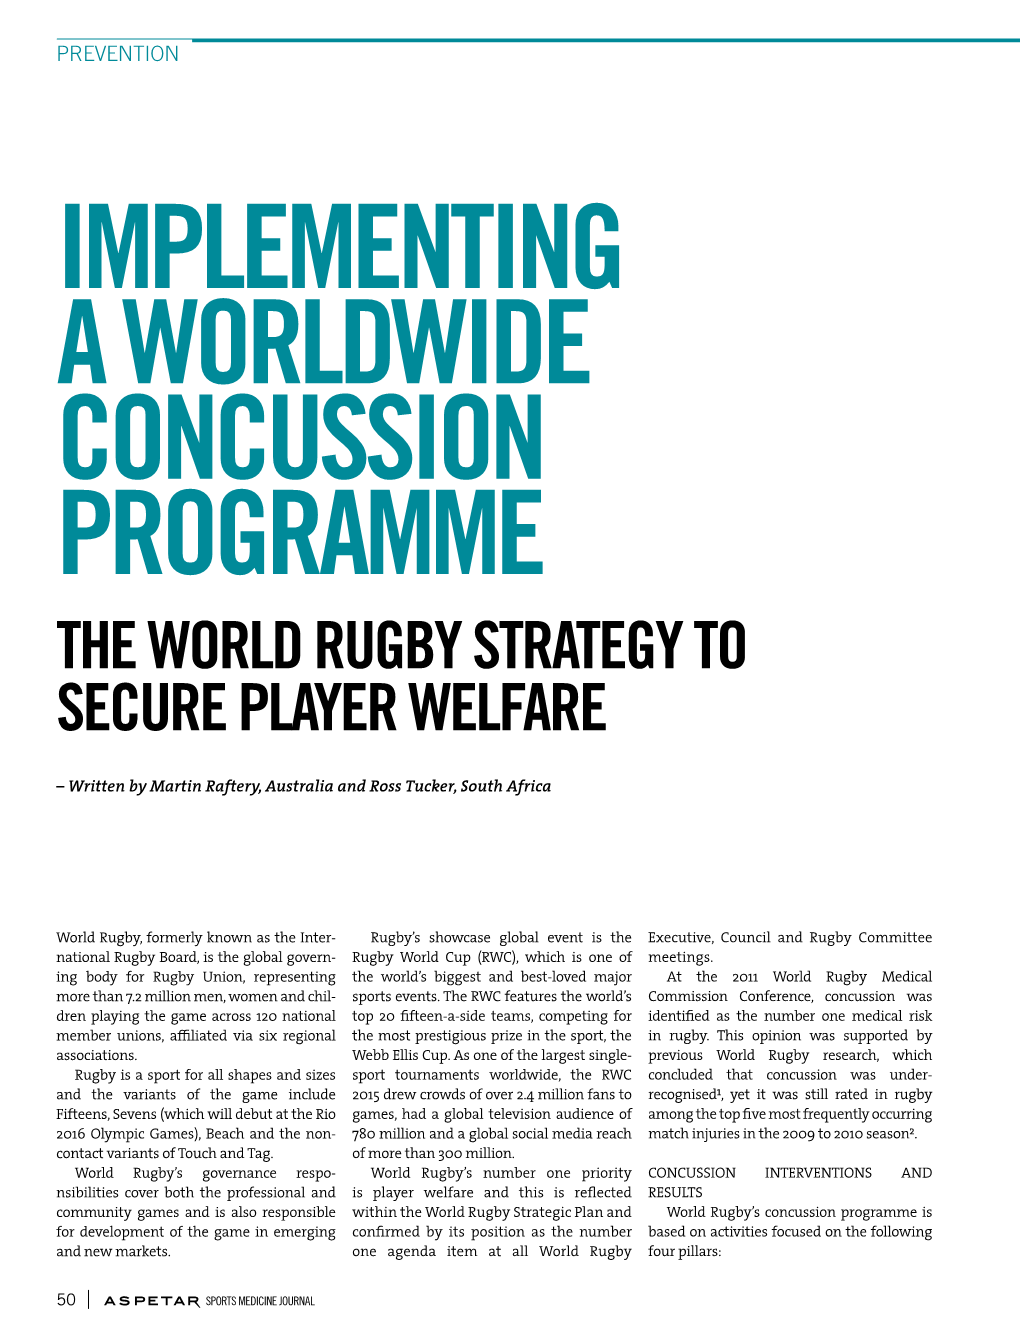 The World Rugby Strategy to Secure Player Welfare